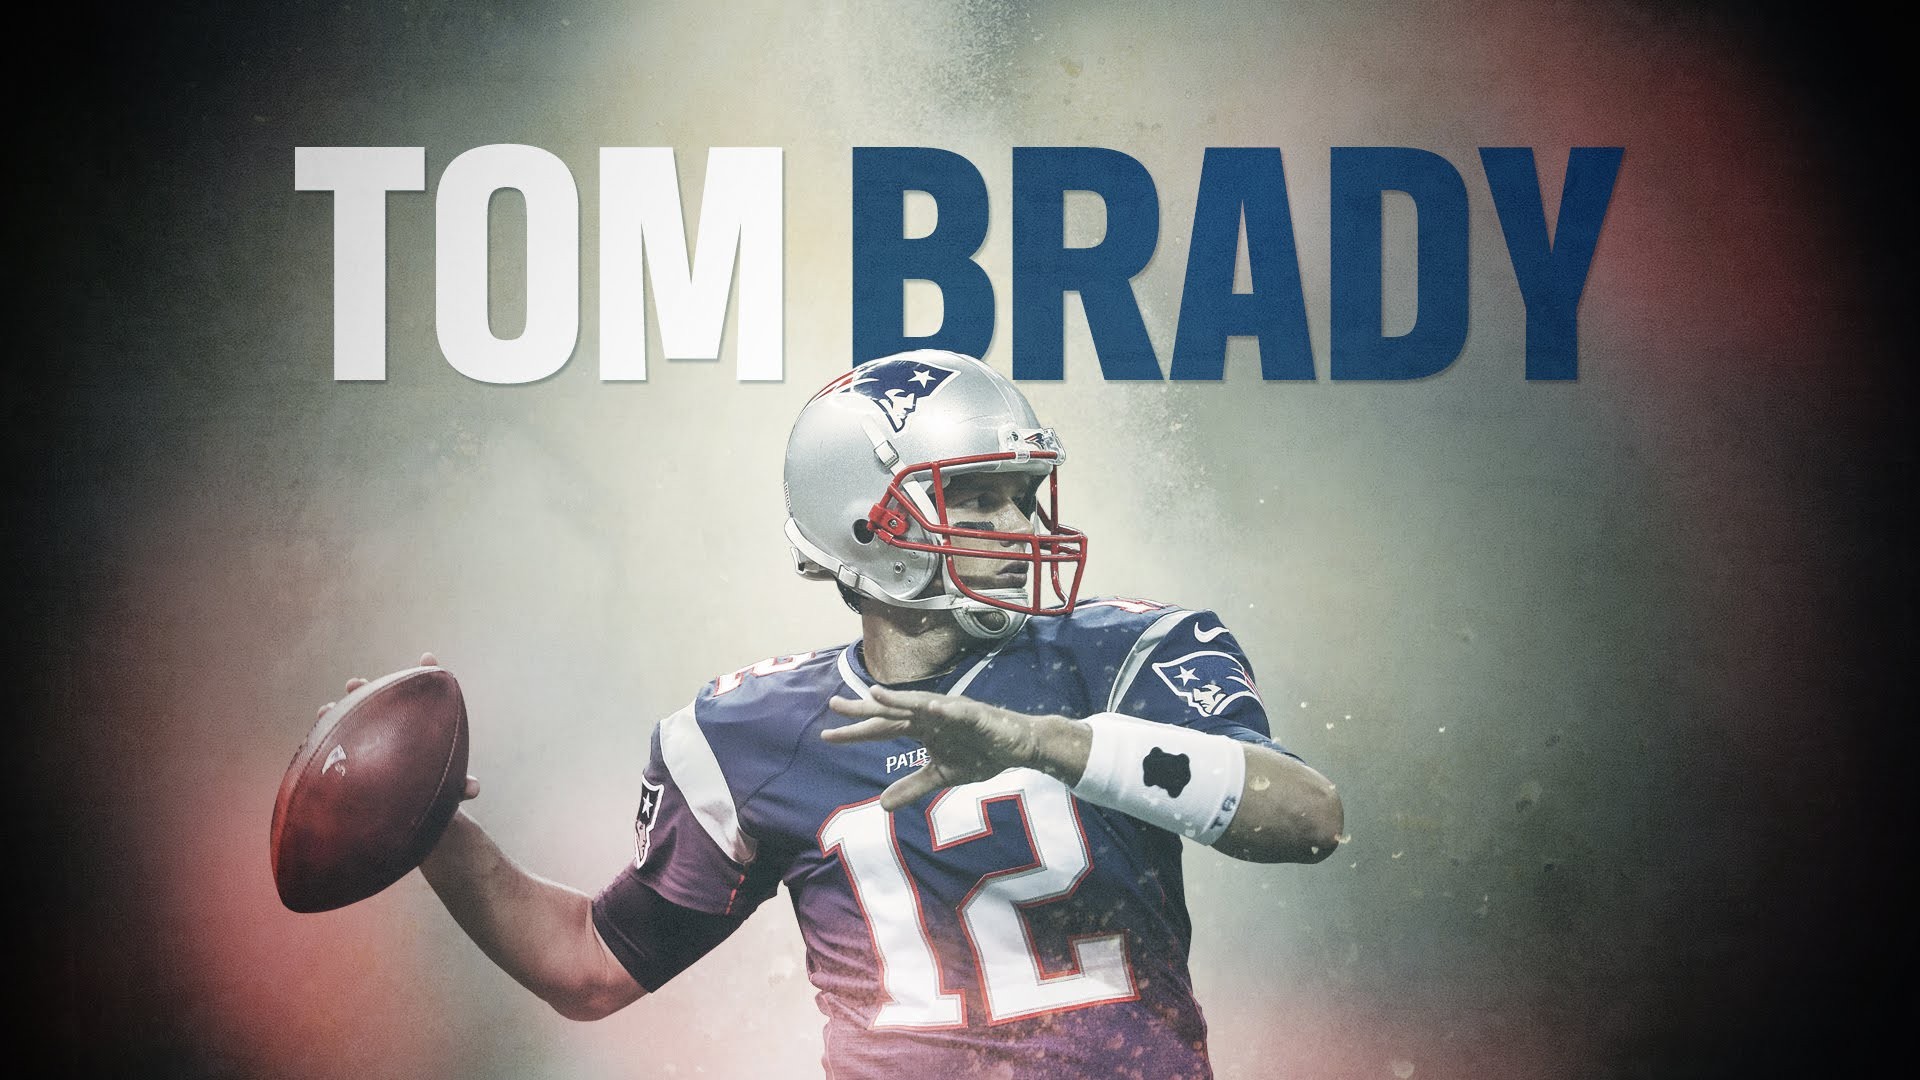 Wallpaper Tom Brady Super Bowl Desktop with resolution 1920X1080 pixel. You can use this wallpaper as background for your desktop Computer Screensavers, Android or iPhone smartphones